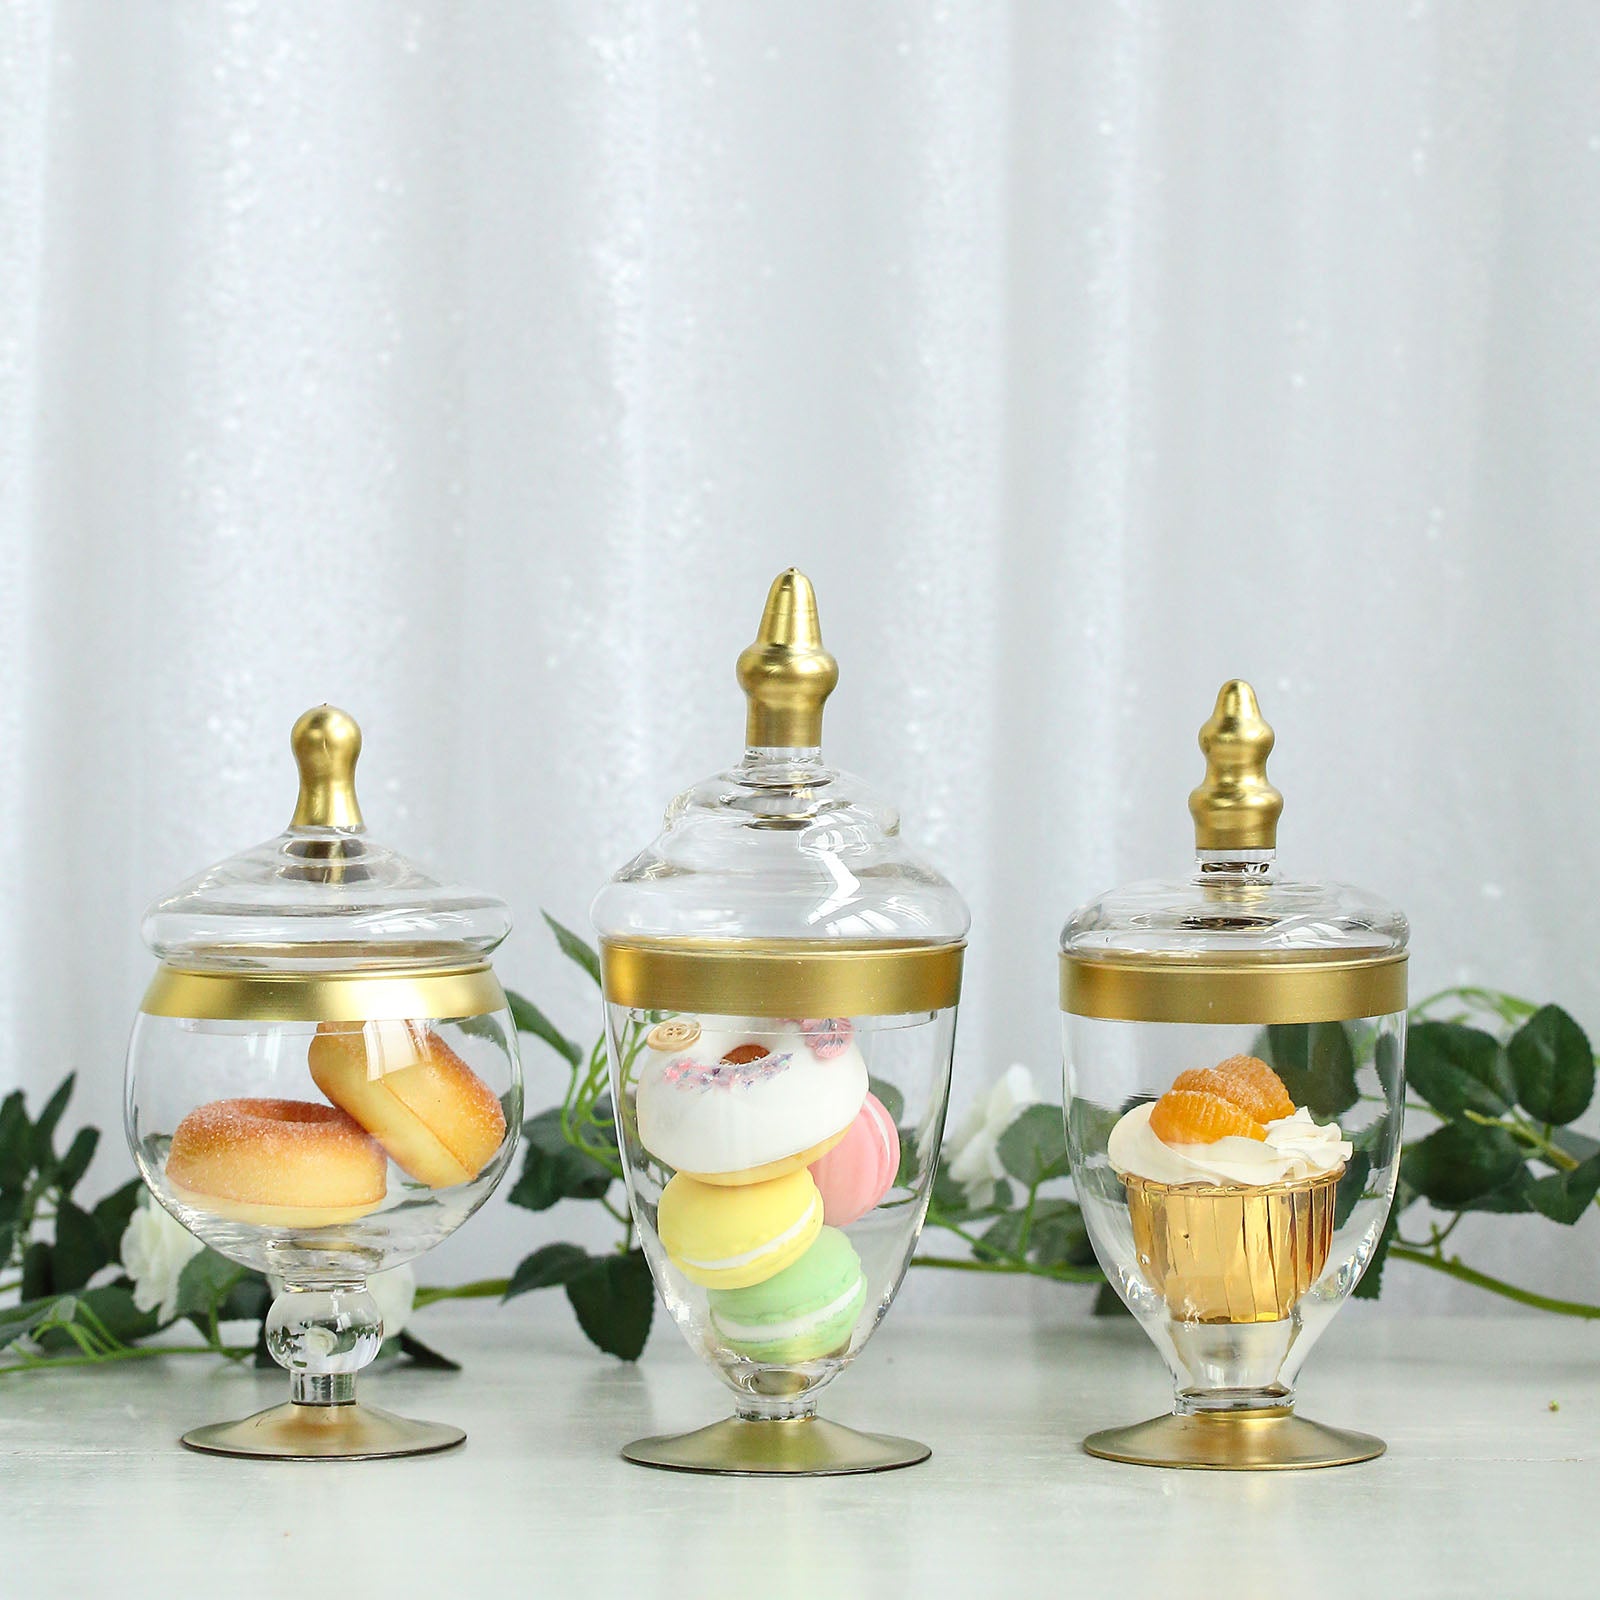 Set Of 3 Apothecary Glass Candy Jars With Lids - 9/13/14